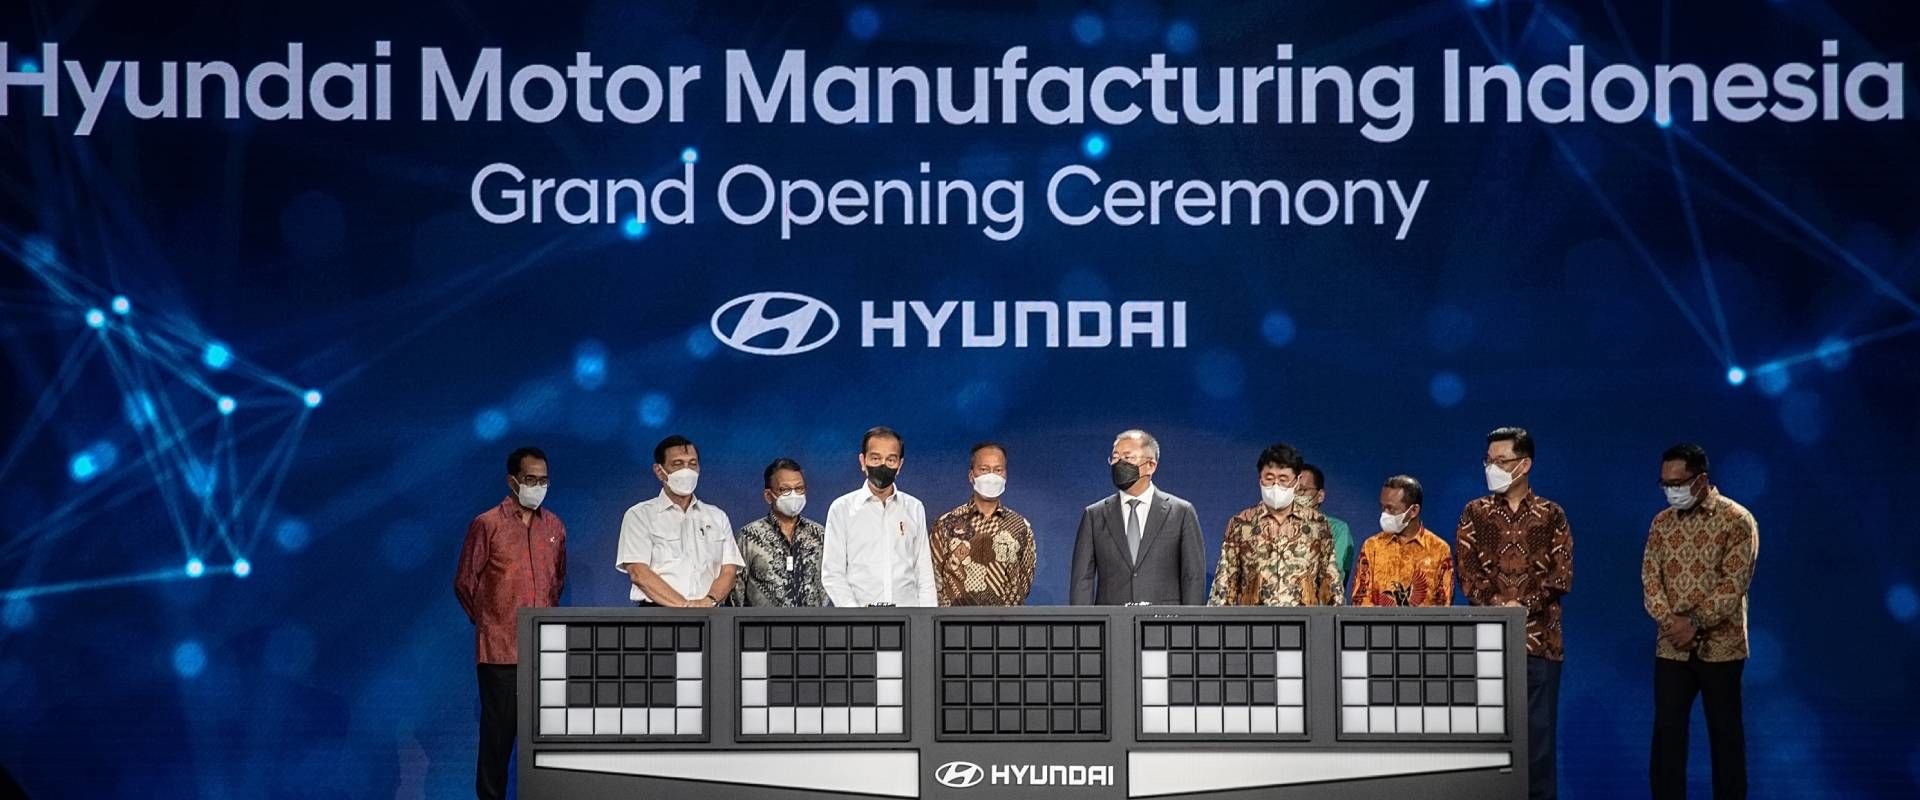 Hyundai Motor Company Inaugurates Its First Manufacturing Plant in Southeast Asia